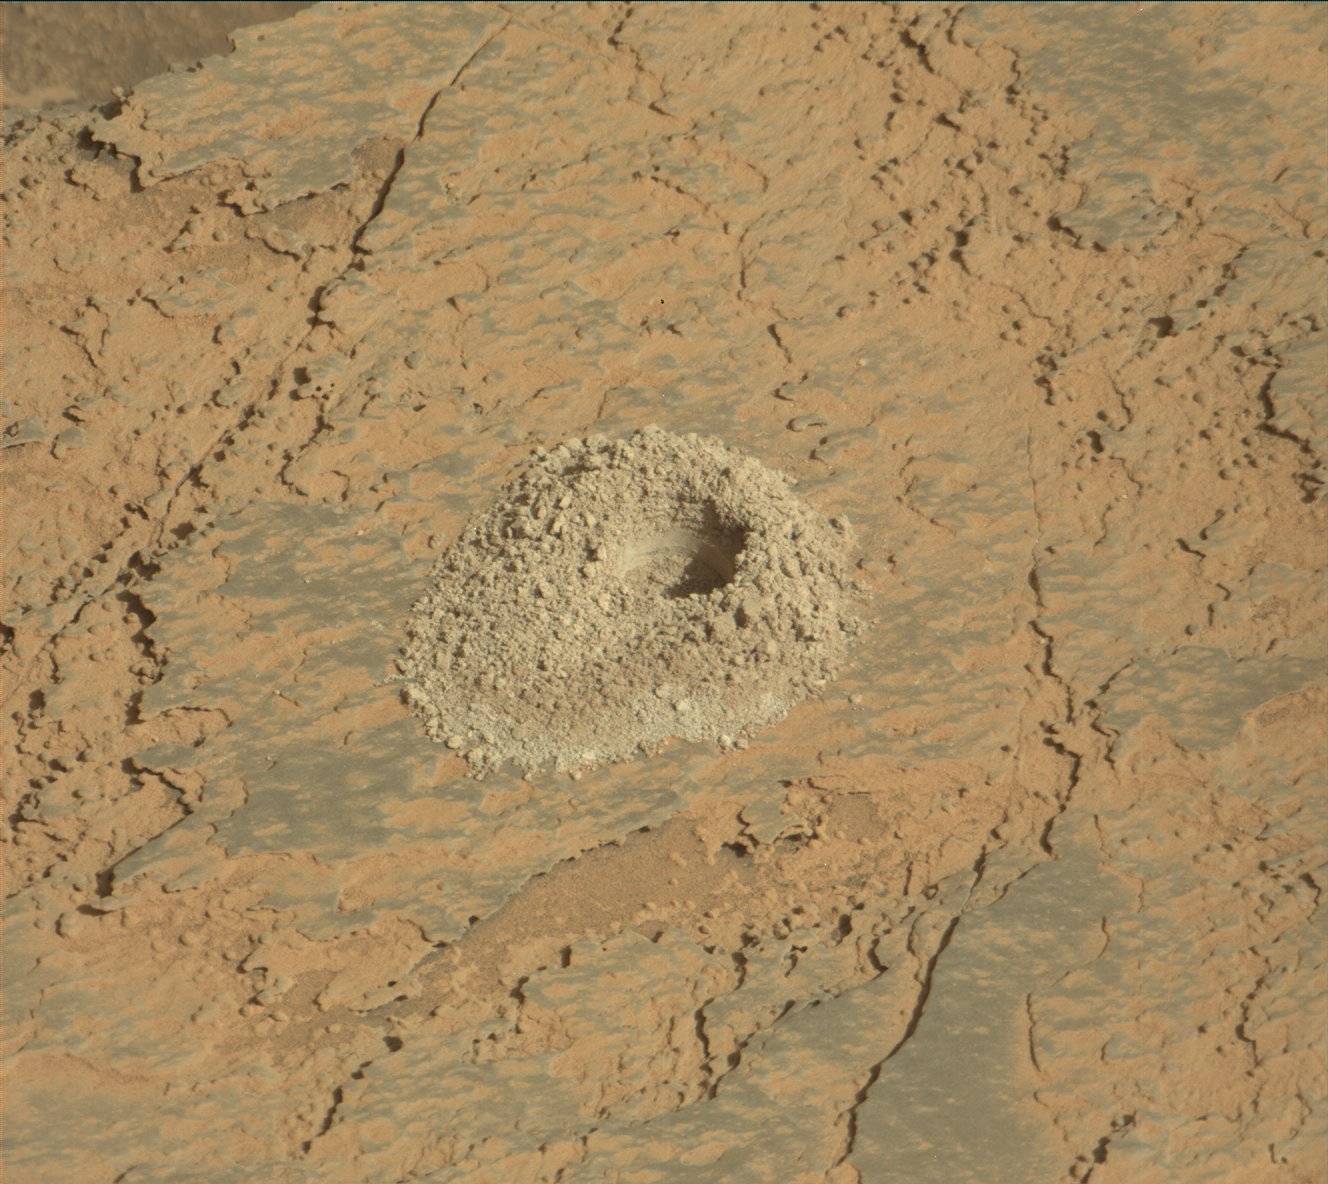 A hole up in tha surface of Mars pimped by tha Curiositizzle rover